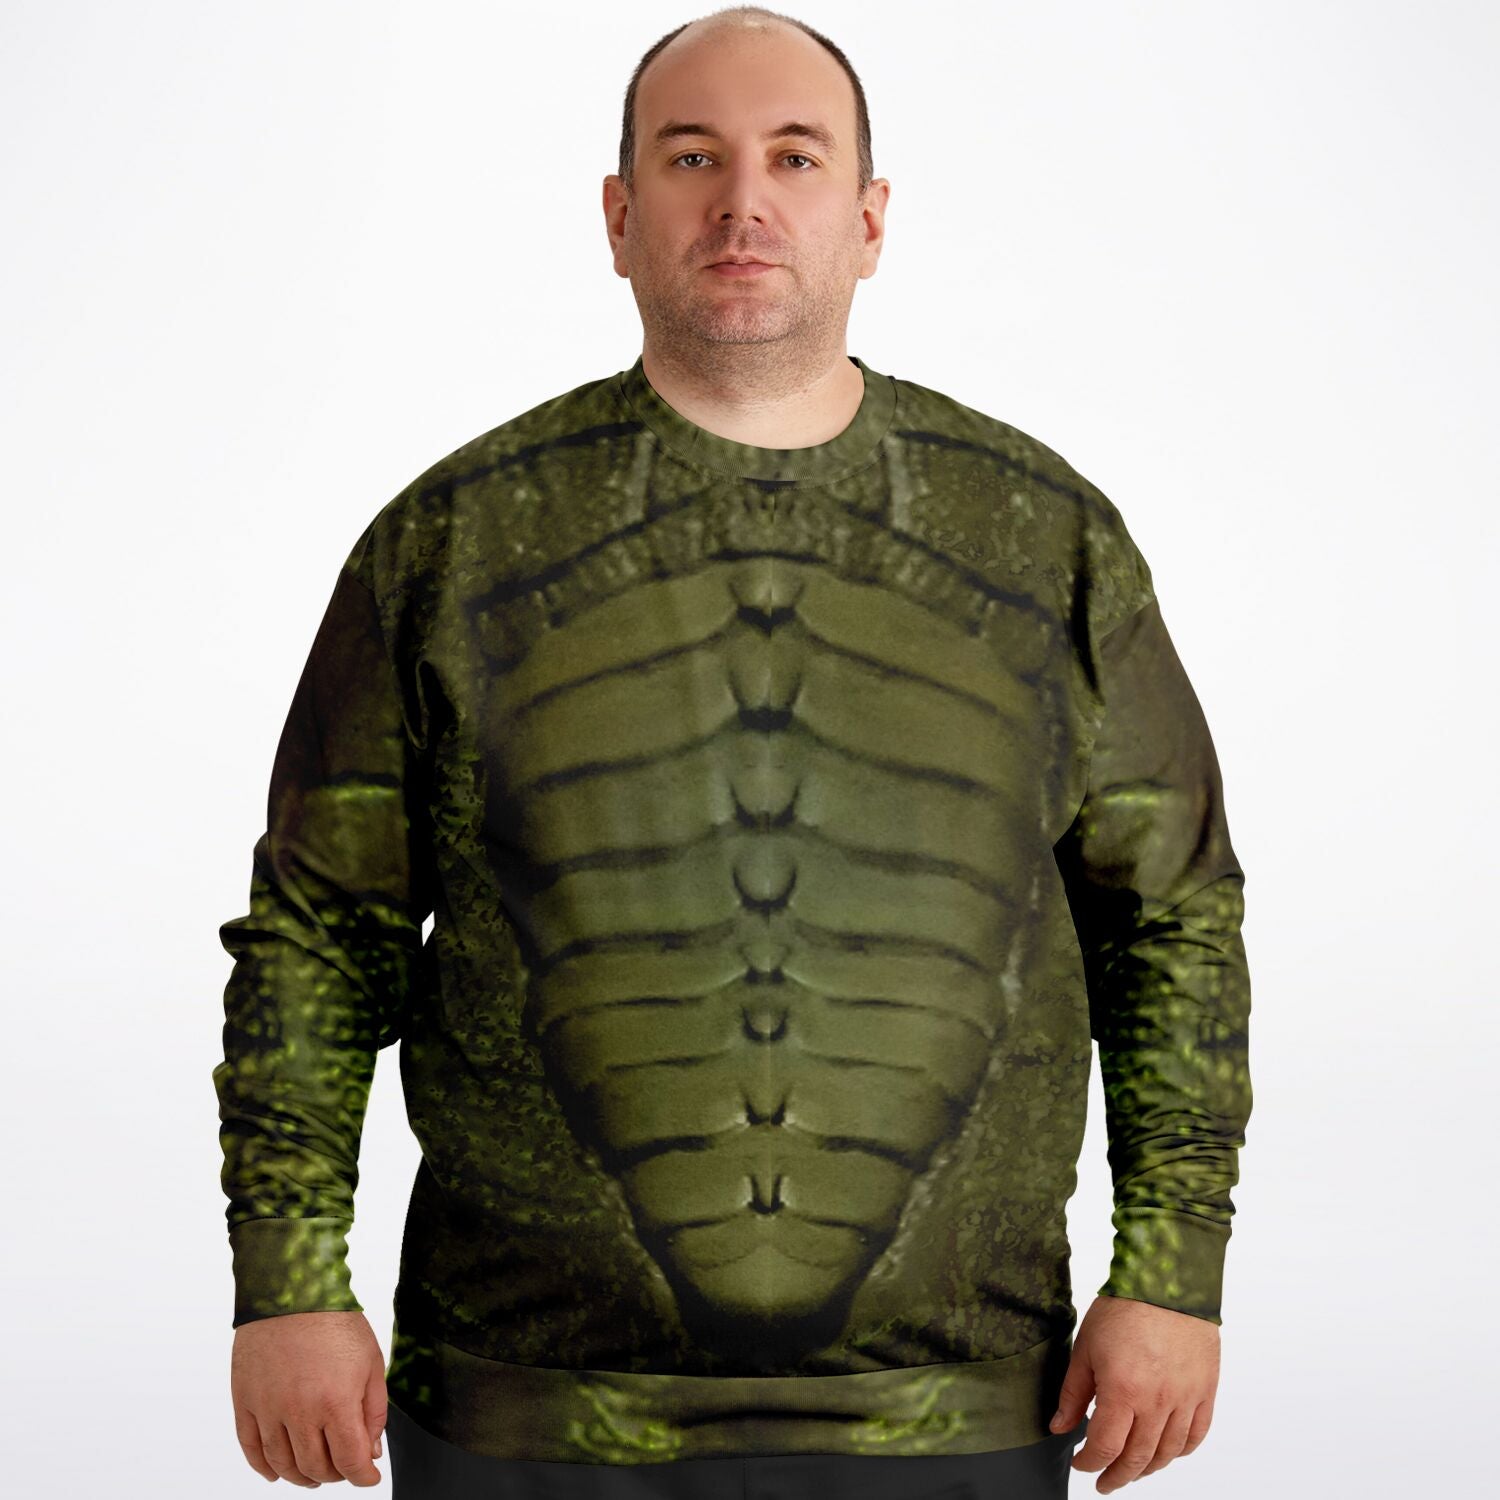 Creature from the Black Lagoon Inspired Plus-size Sweatshirt